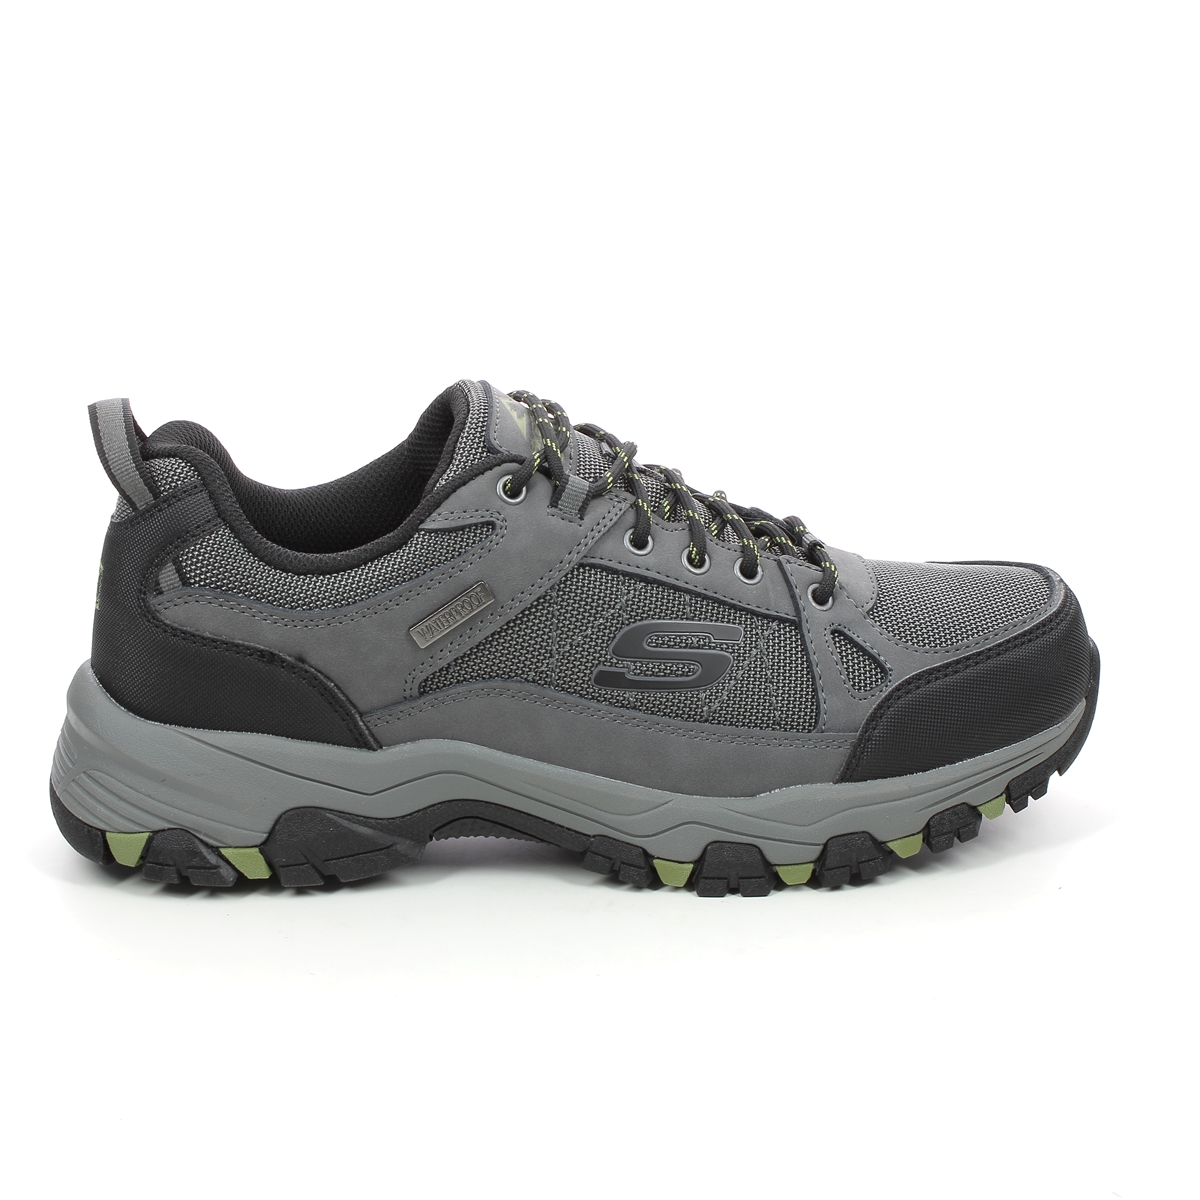 Skechers Selmen Cormack Relaxed 204427 CHAR Charcoal Trainers